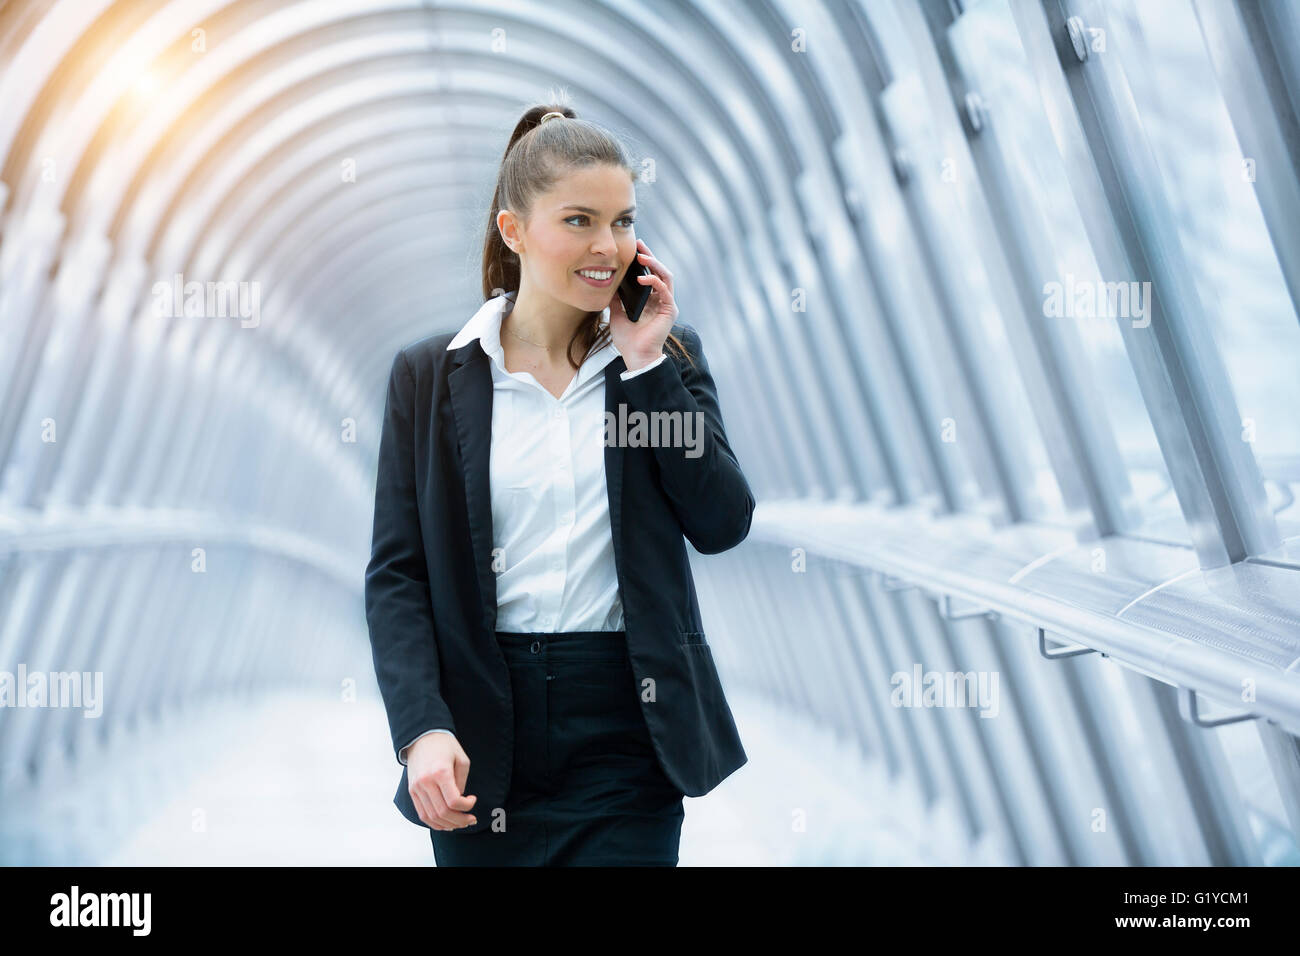 Businesswoman talking on mobile phone Banque D'Images